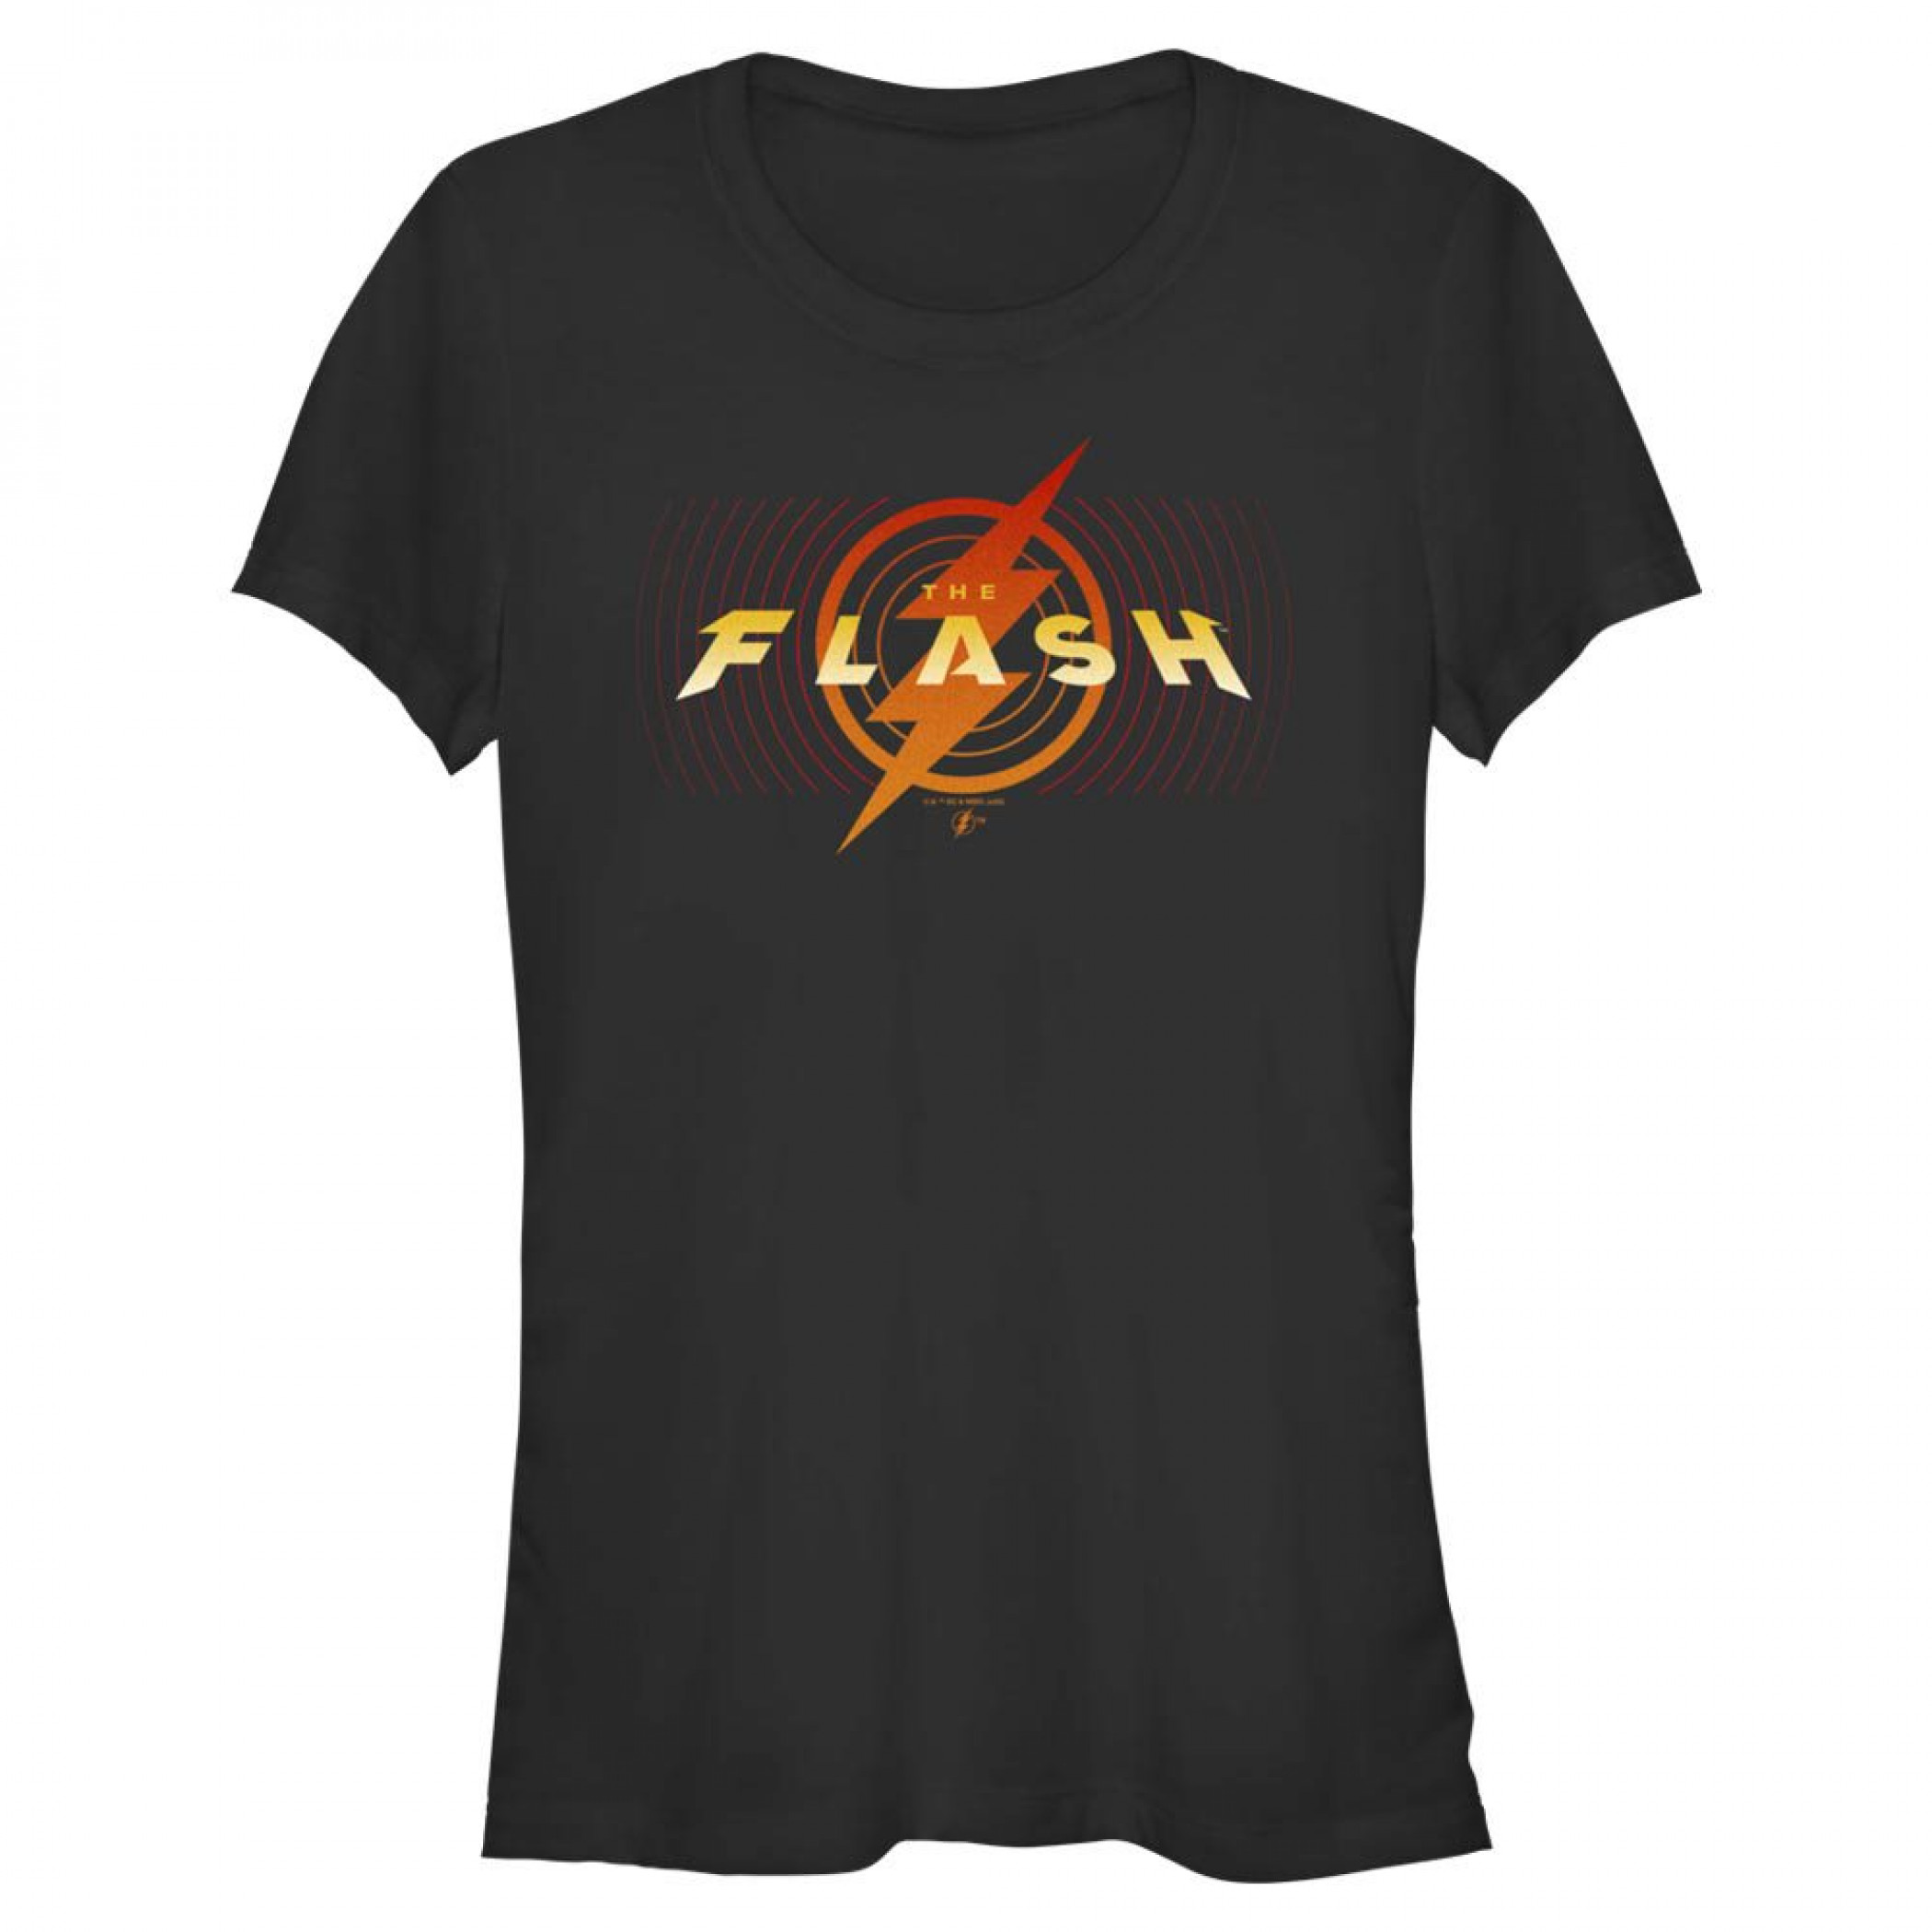 The Flash Booming Wave Junior's T-Shirt